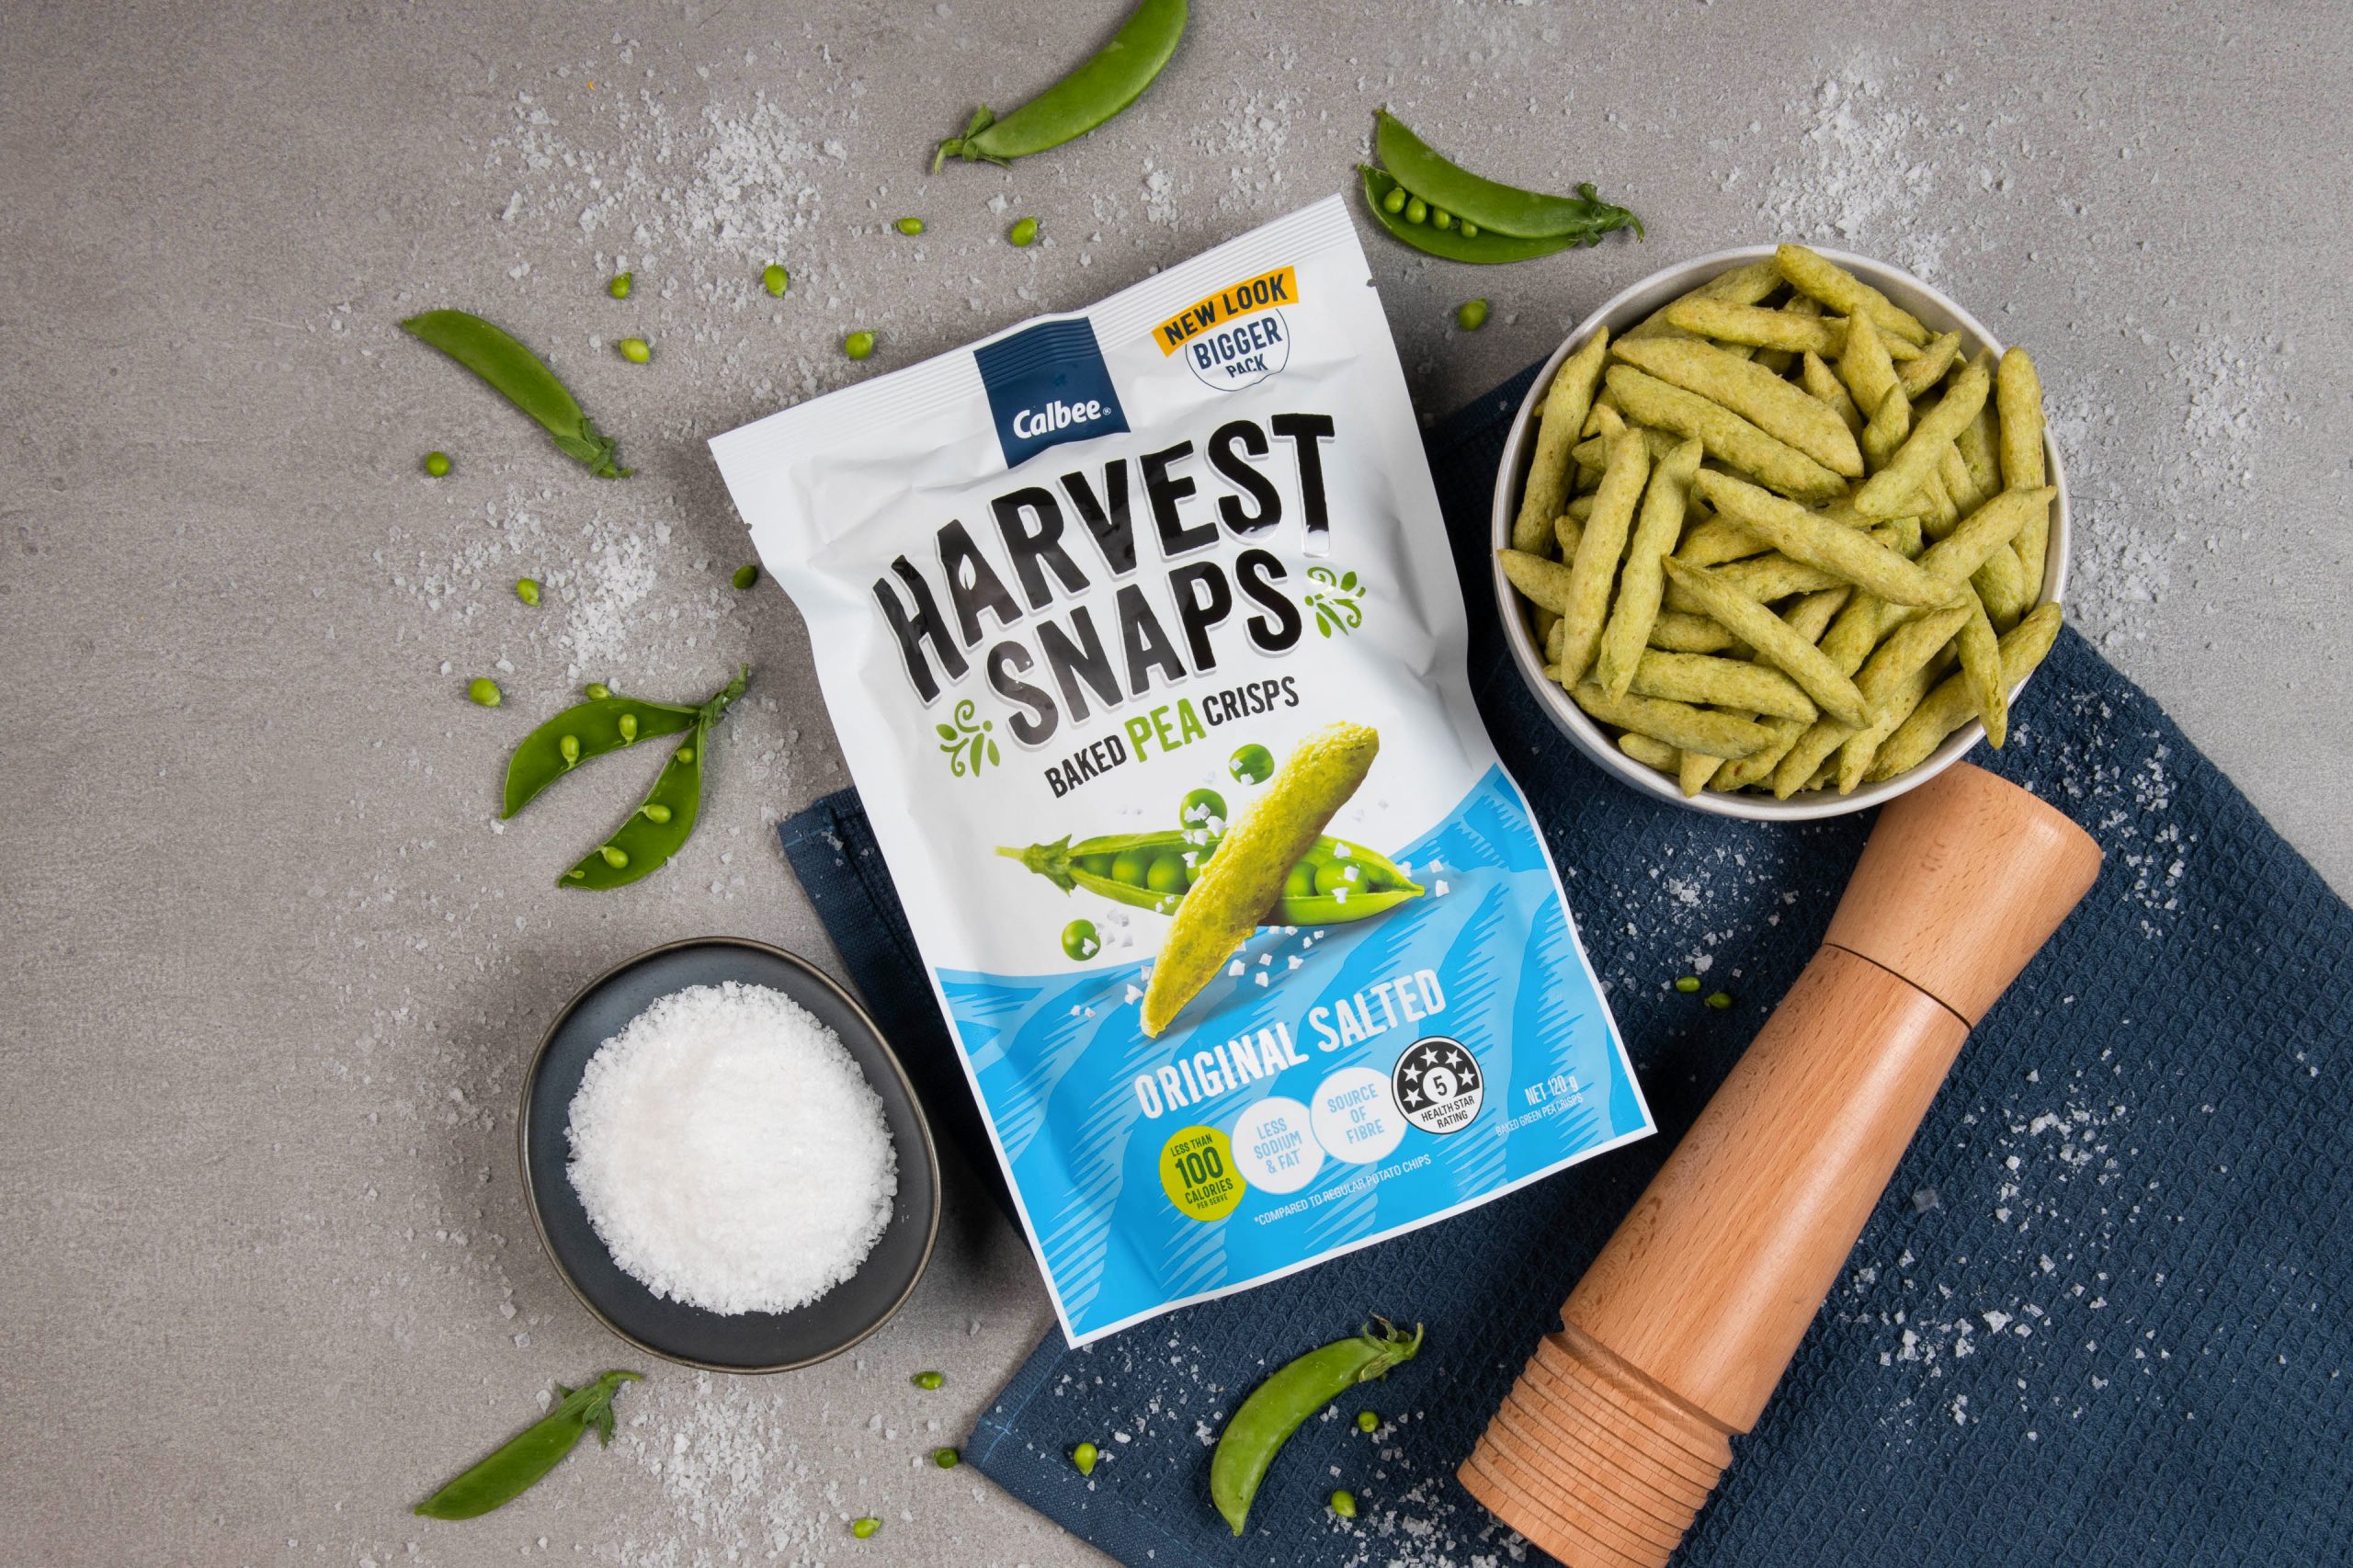 Healthier and new look makeover for Harvest Snaps - Retail World Magazine